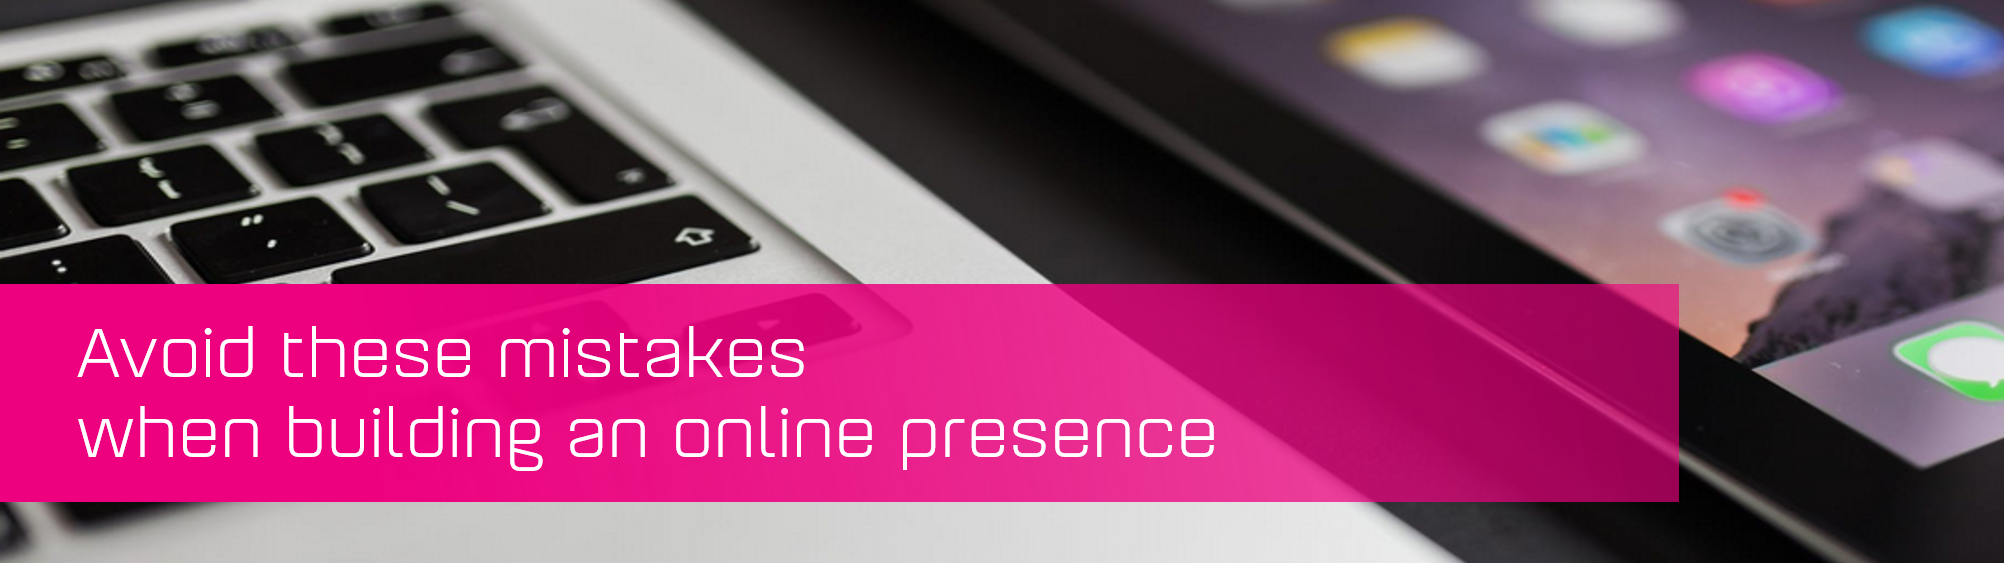 KCS SA - Blog - Avoid these mistake when building online presence